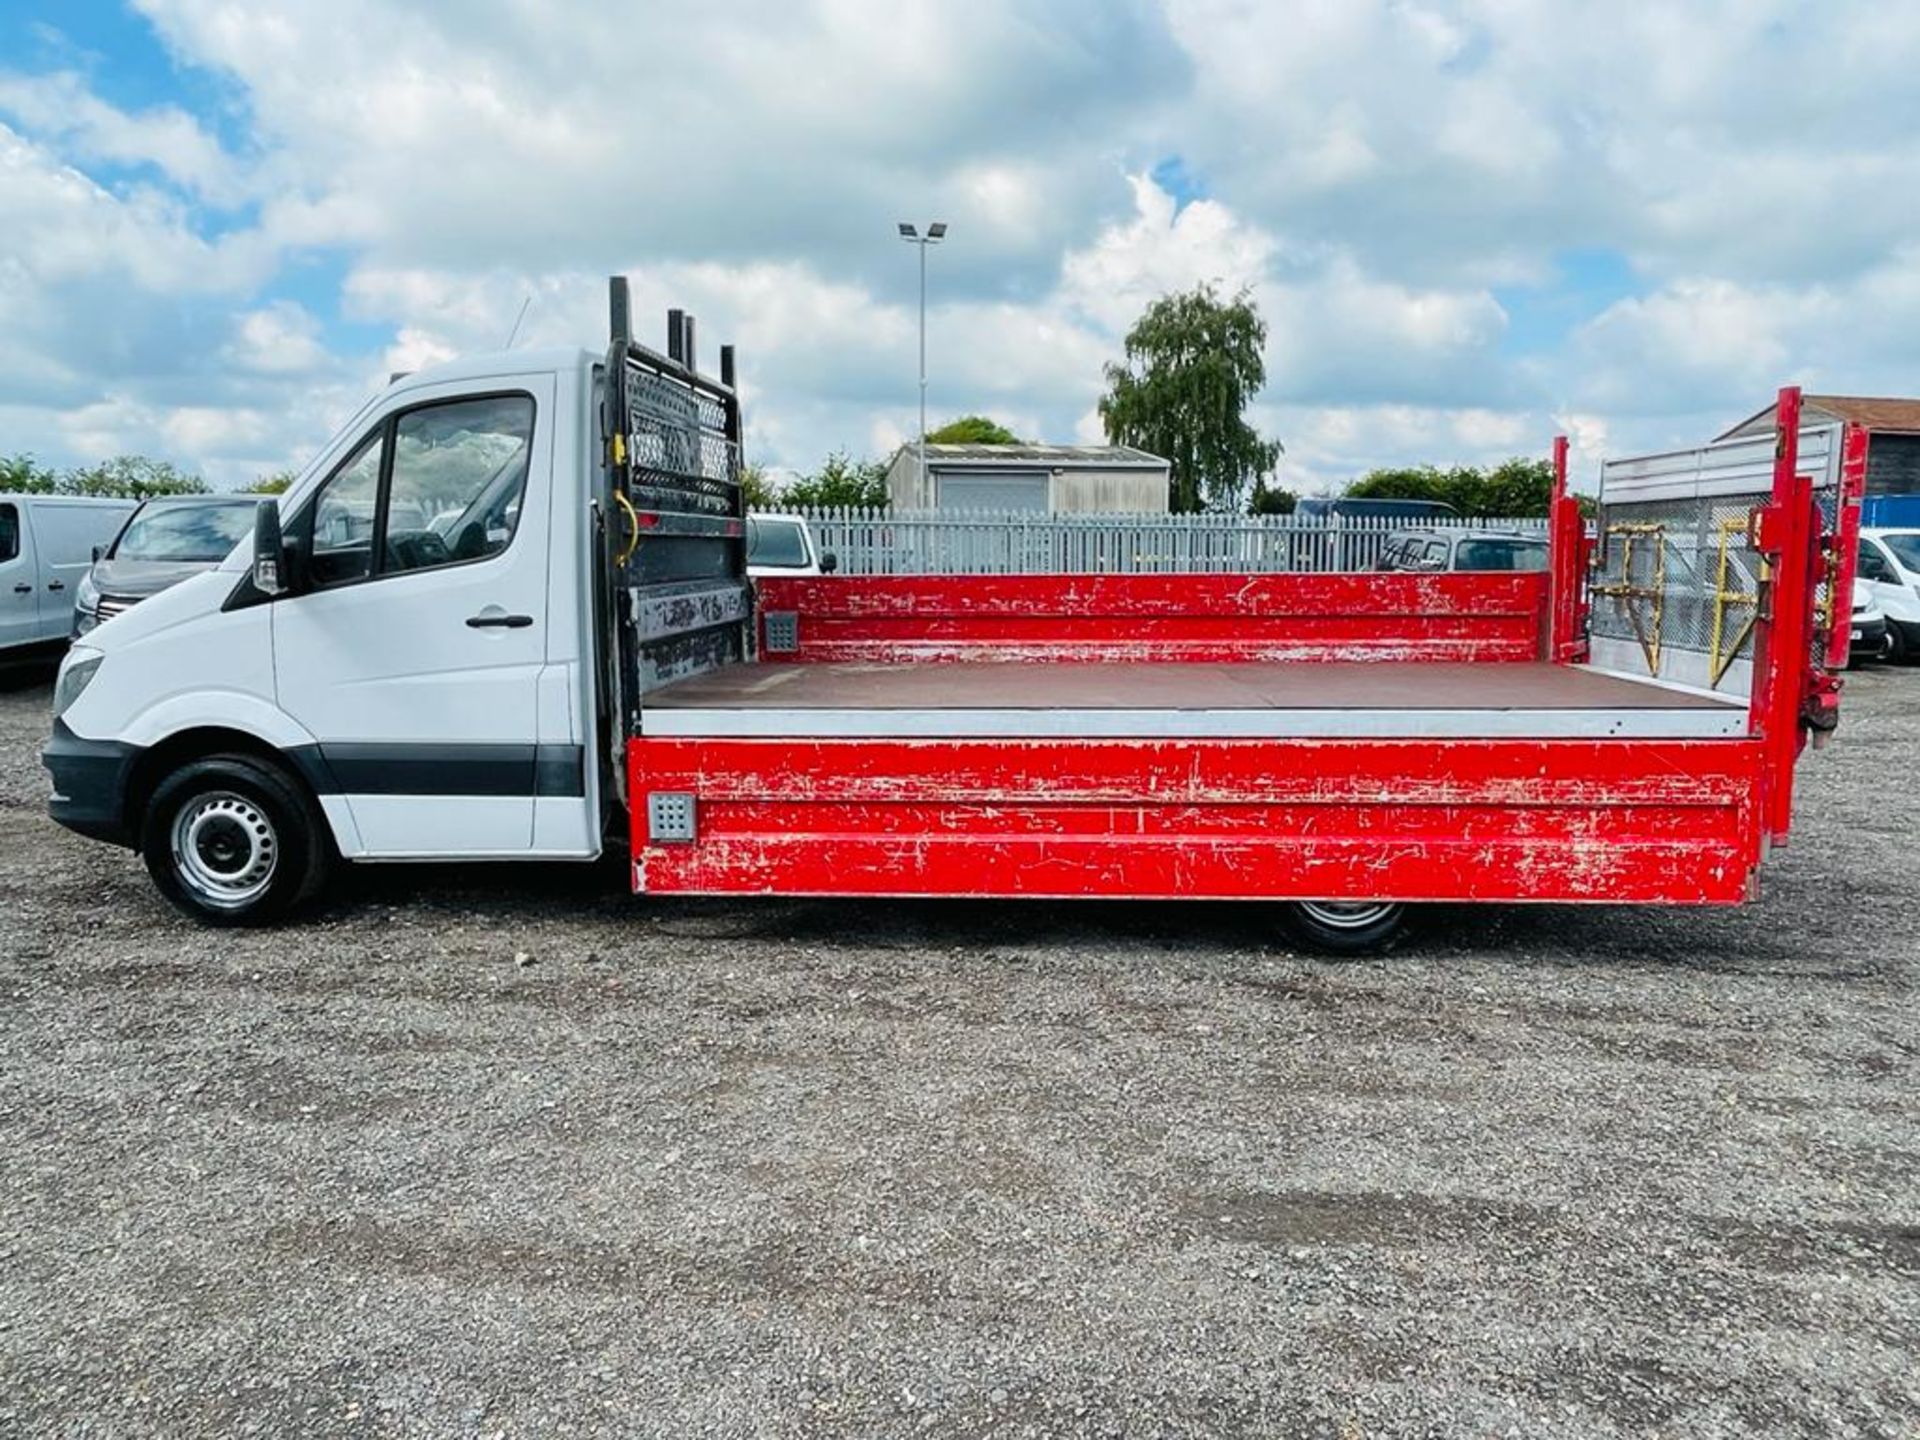 Mercedes Benz Sprinter 2.1 313 CDI L3 Alloy Dropside 2015 '65 Reg' - Cruise Control - Tail Lift - Image 6 of 21